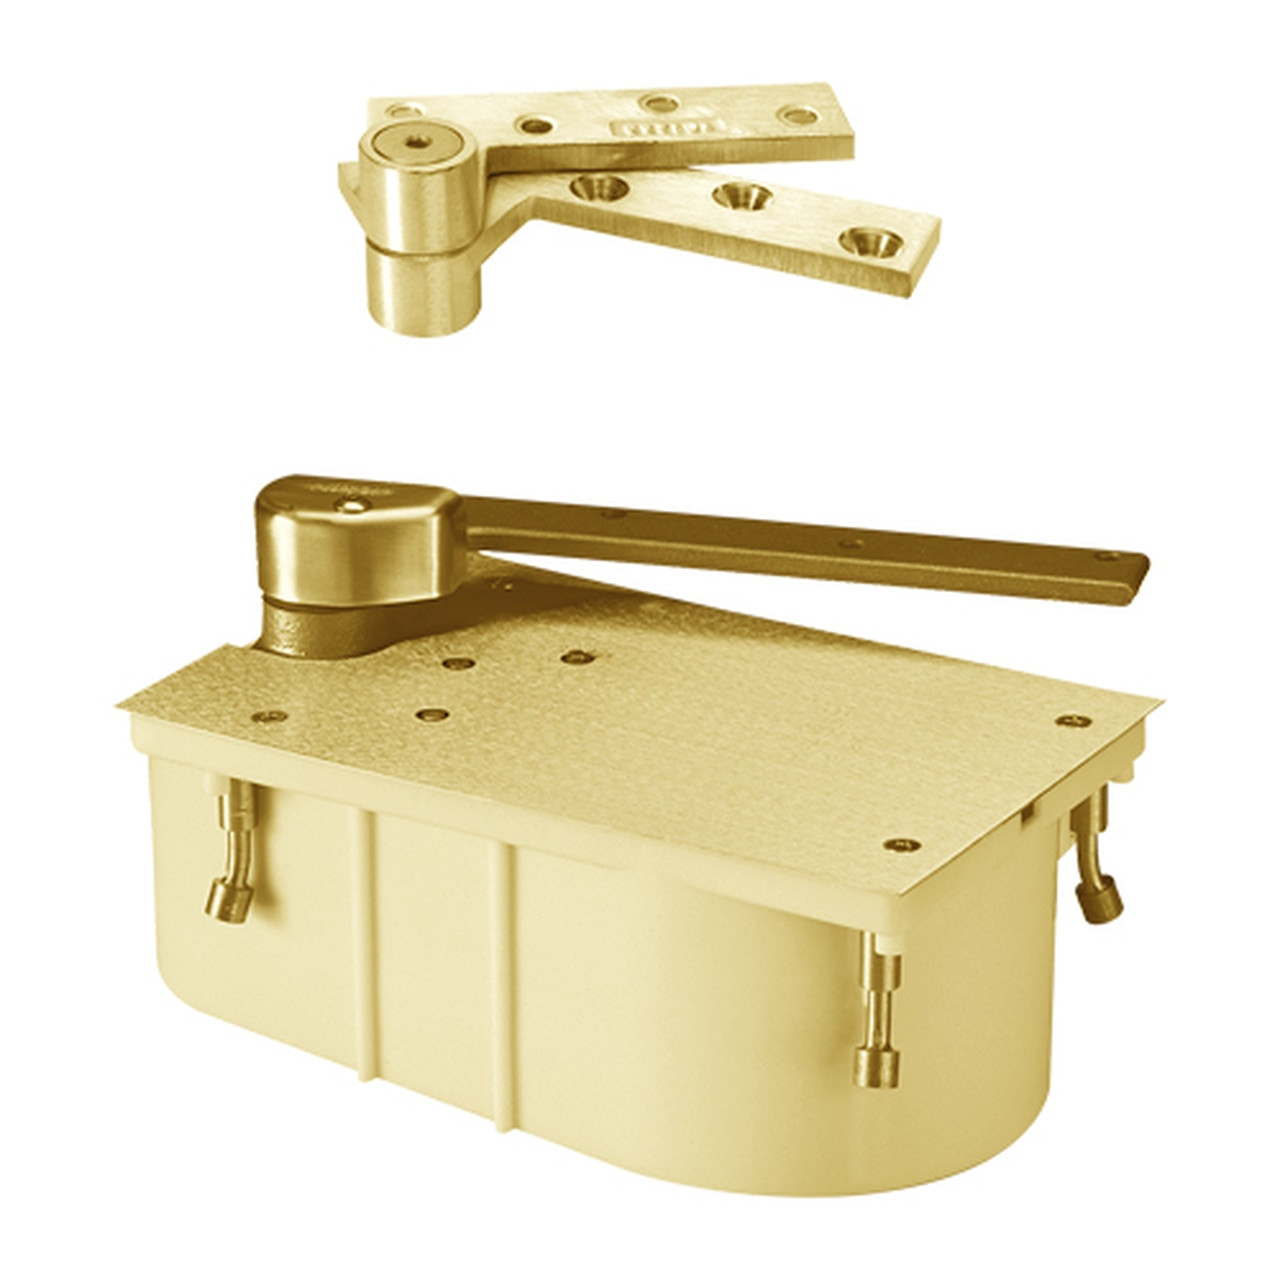 F27-105N-1-1-2OS-CWF-LH-605 Rixson 27 Series Fire Rated Heavy Duty 1-1/2" Offset Hung Floor Closer in Bright Brass Finish